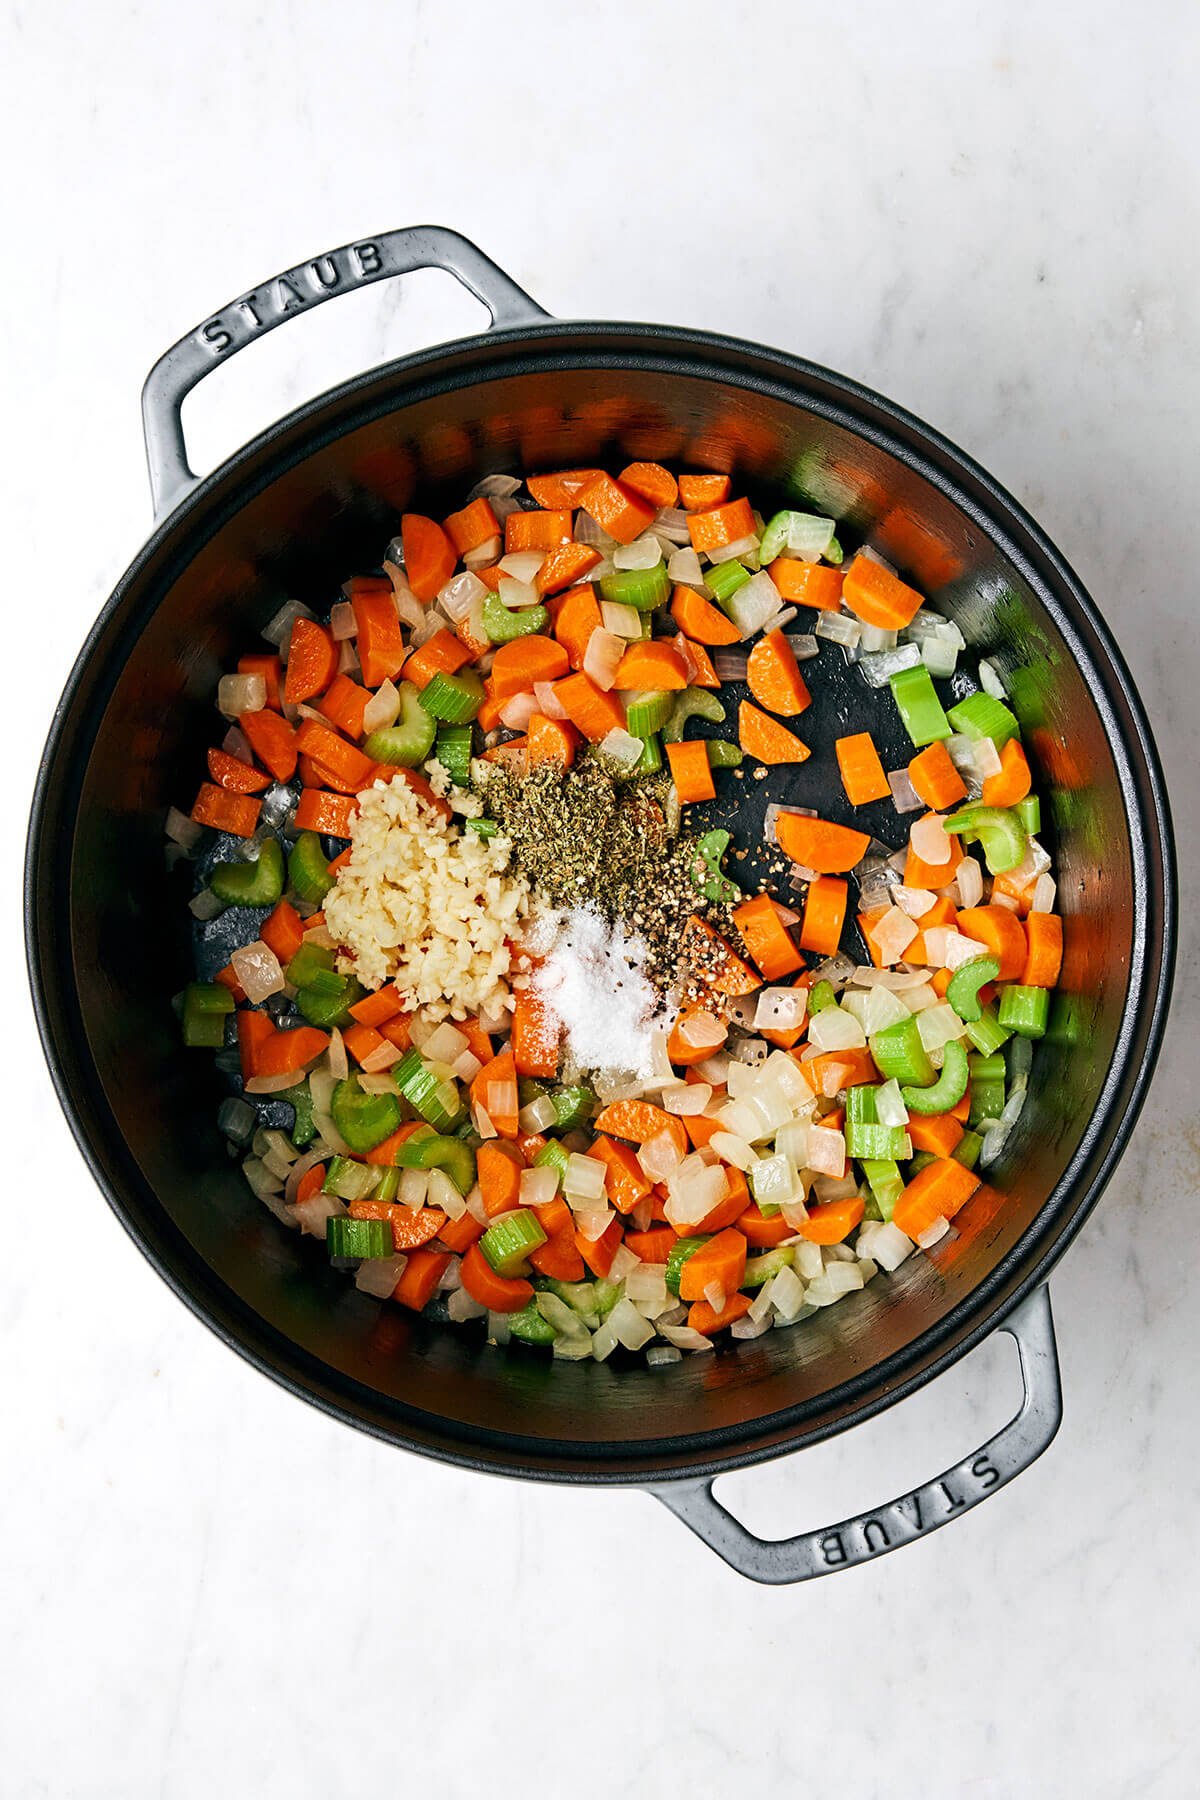 Sauteing vegetables in a pot